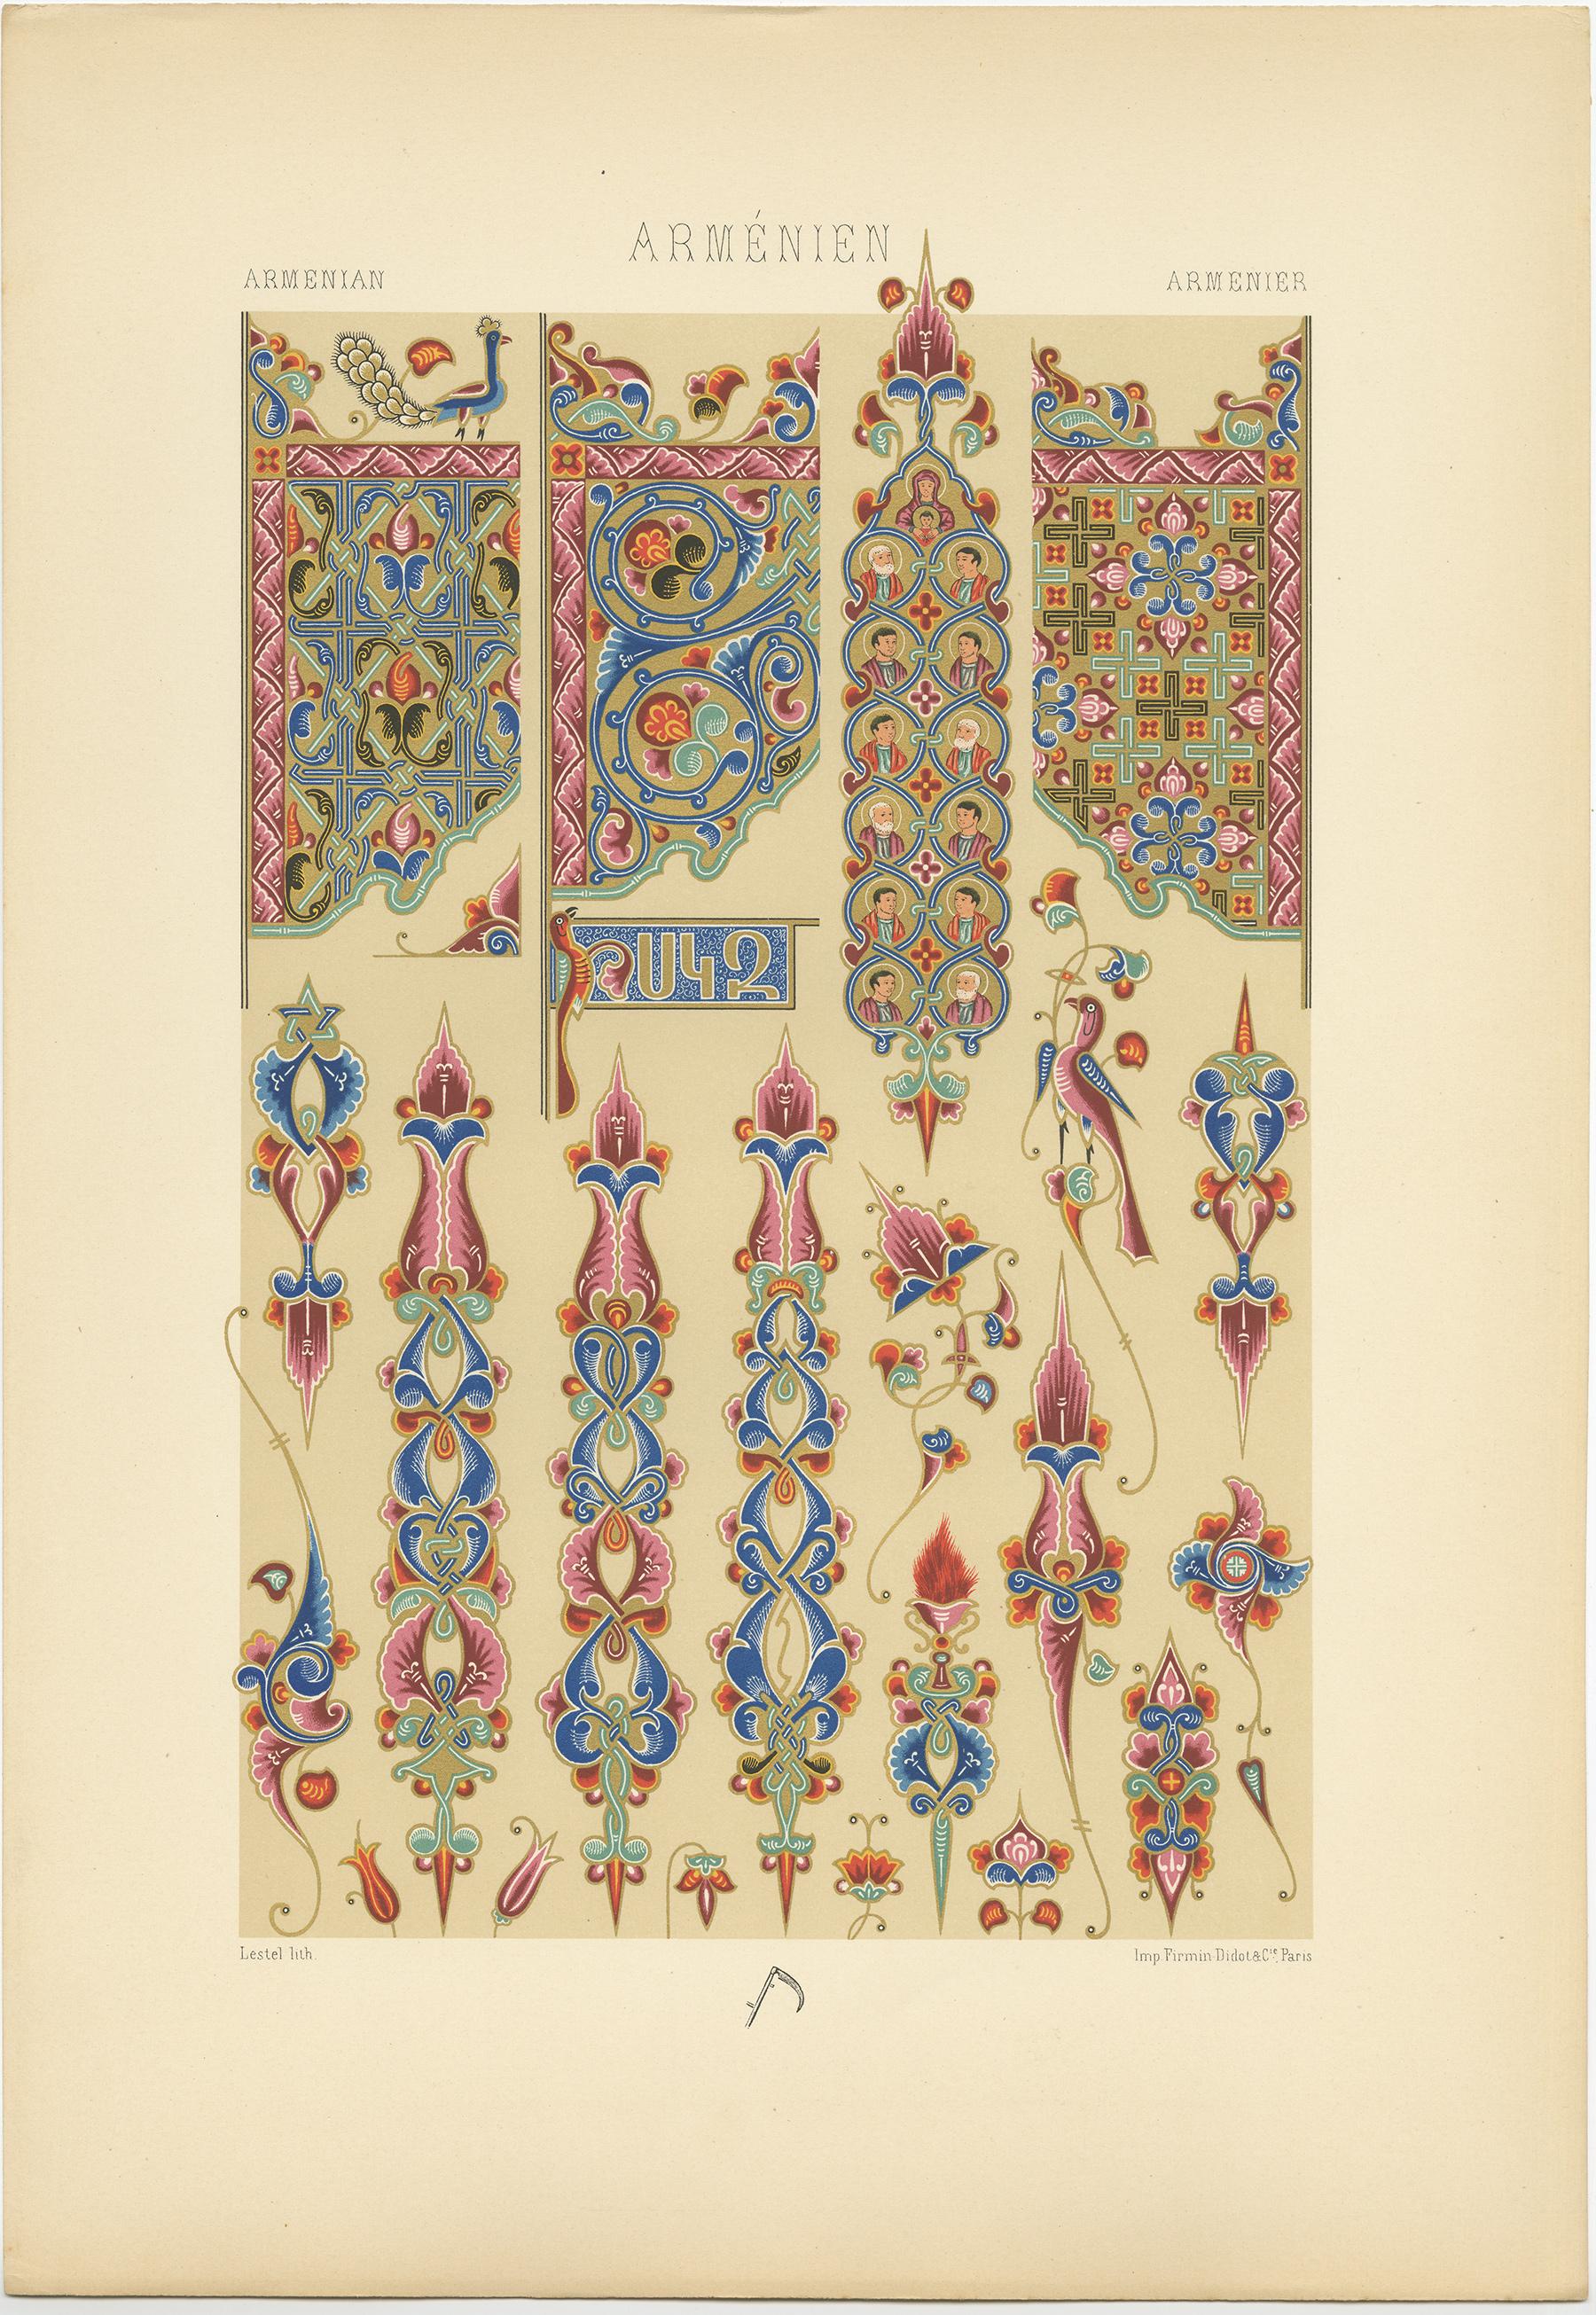 Antique print titled 'Armenian - Armenien - Armenier'. Chromolithograph of motifs from an illuminated gospel manuscripts 16th century ornaments. This print originates from 'l'Ornement Polychrome' by Auguste Racinet. Published circa 1890.